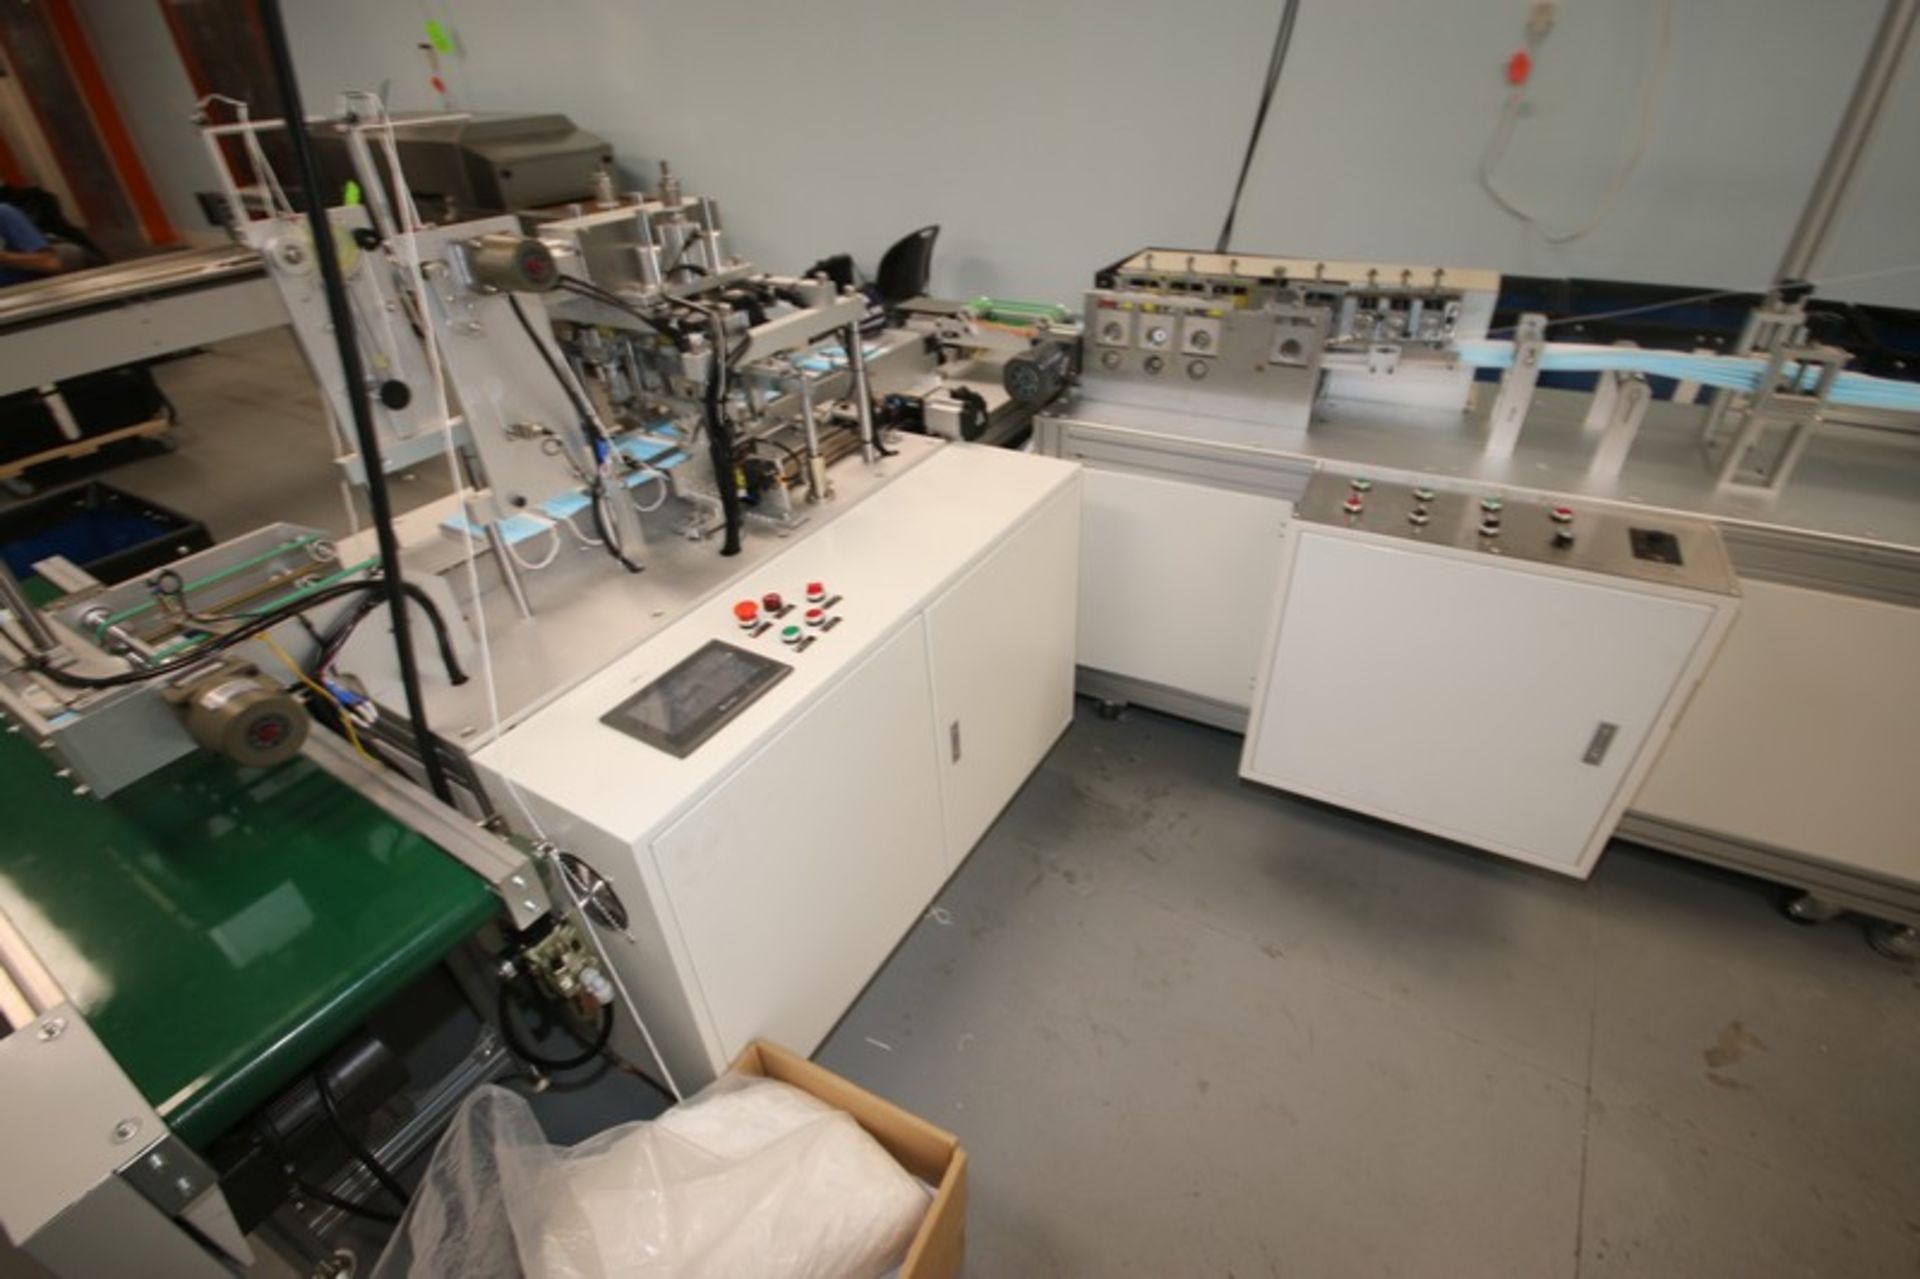 Ultra-Sonic Spindle Medical Mask Manufacturing Machine, with Spindle Rack Containing Top Laying, - Image 13 of 19